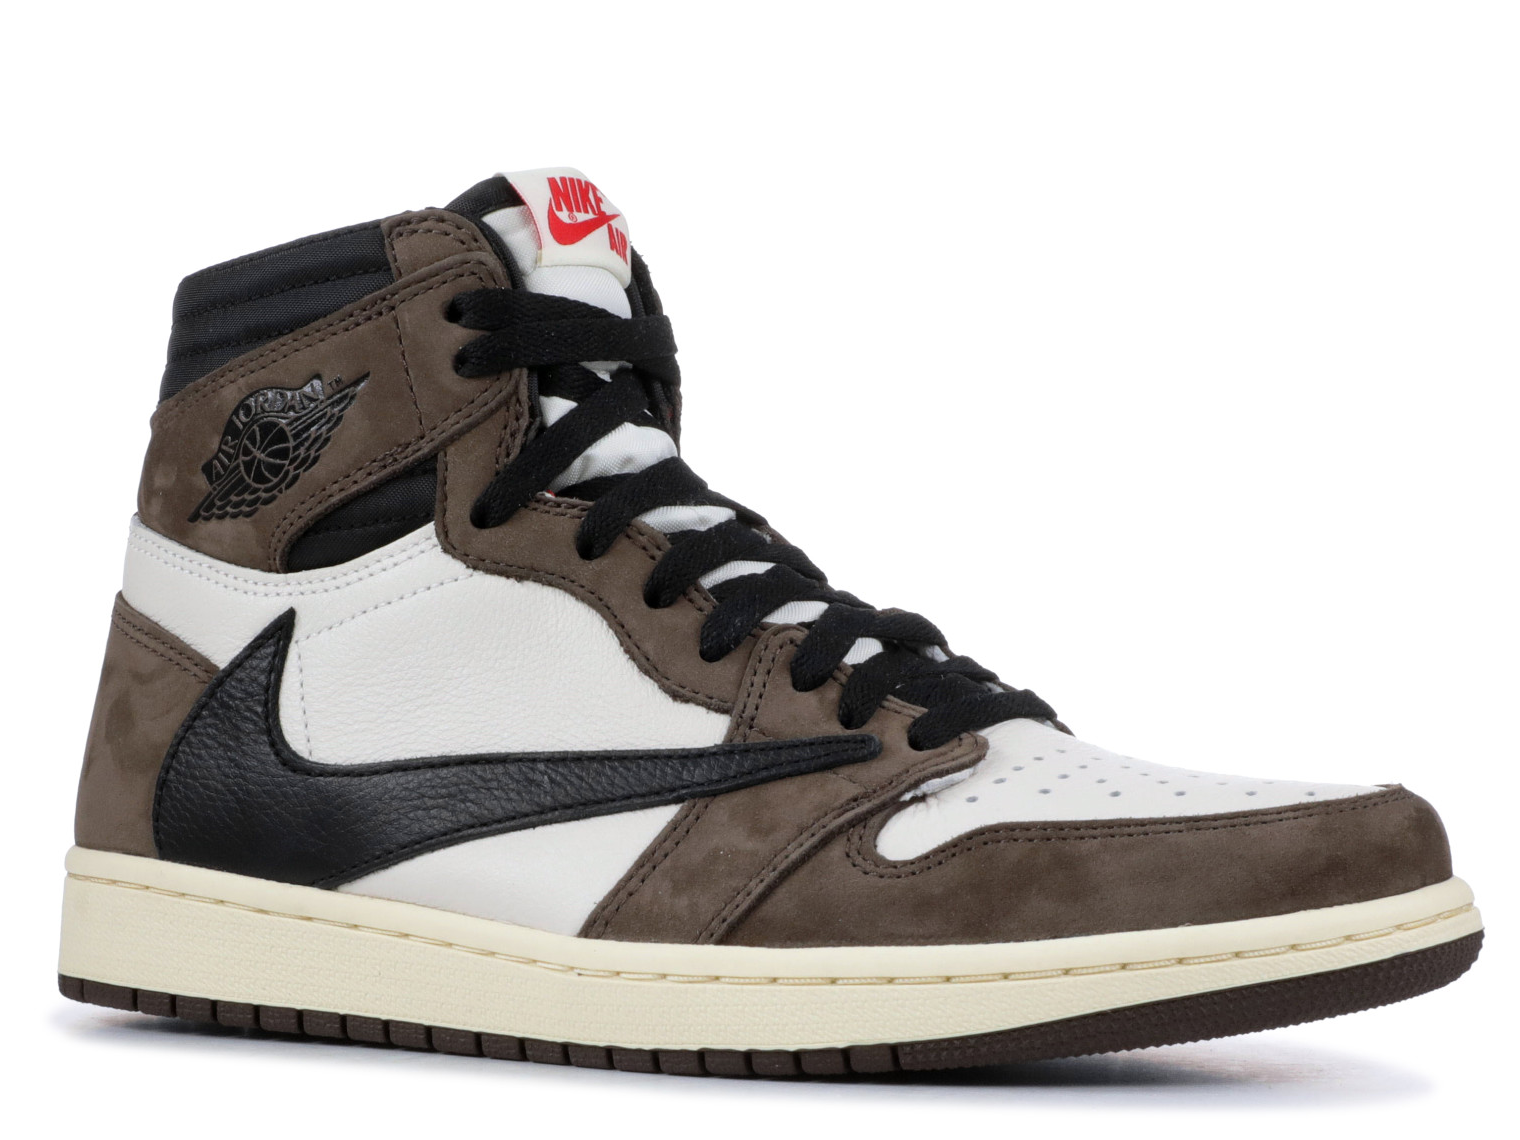 nike collaborations with celebrities